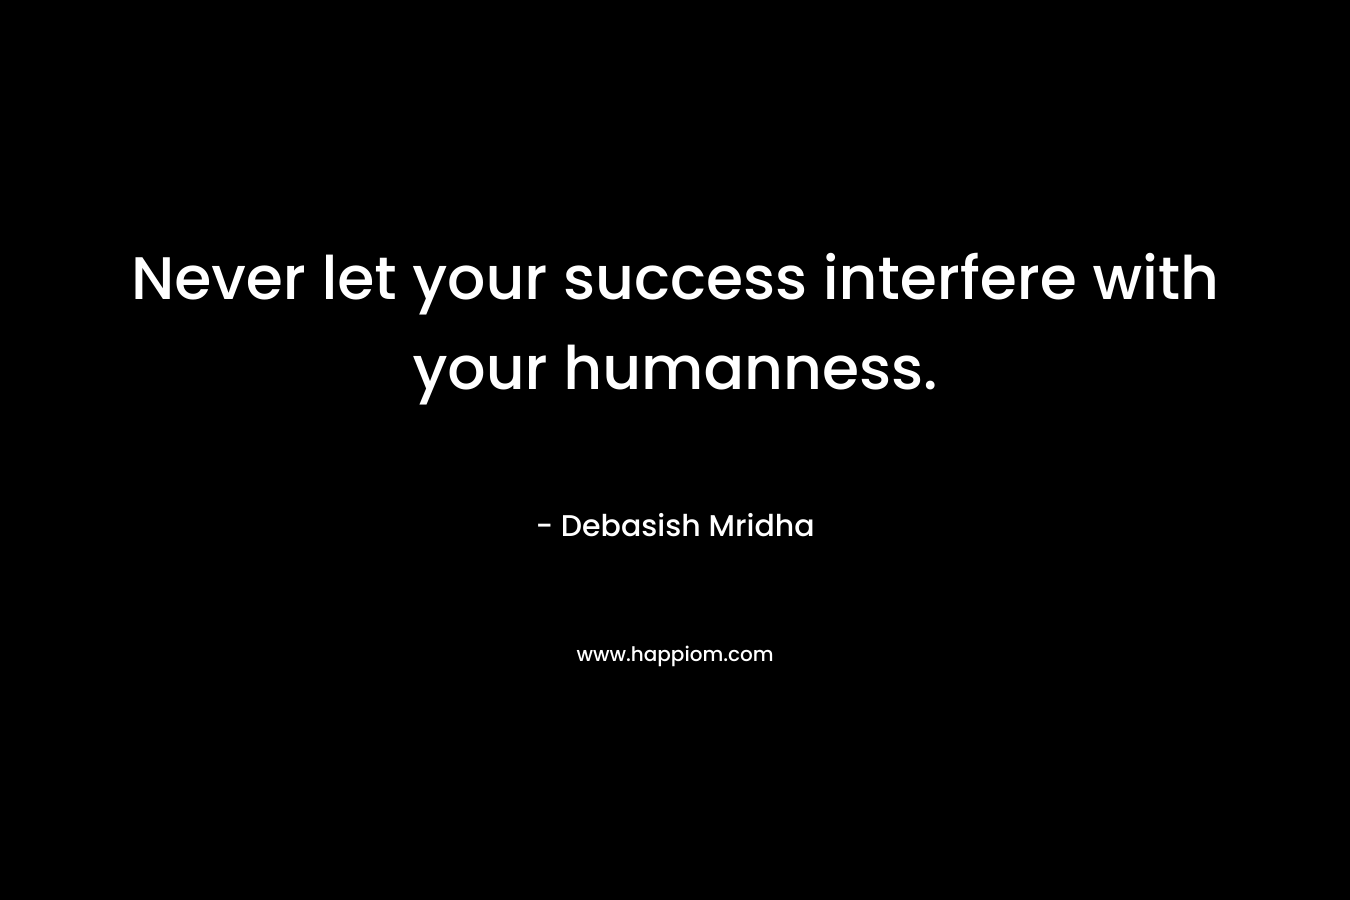 Never let your success interfere with your humanness. – Debasish Mridha